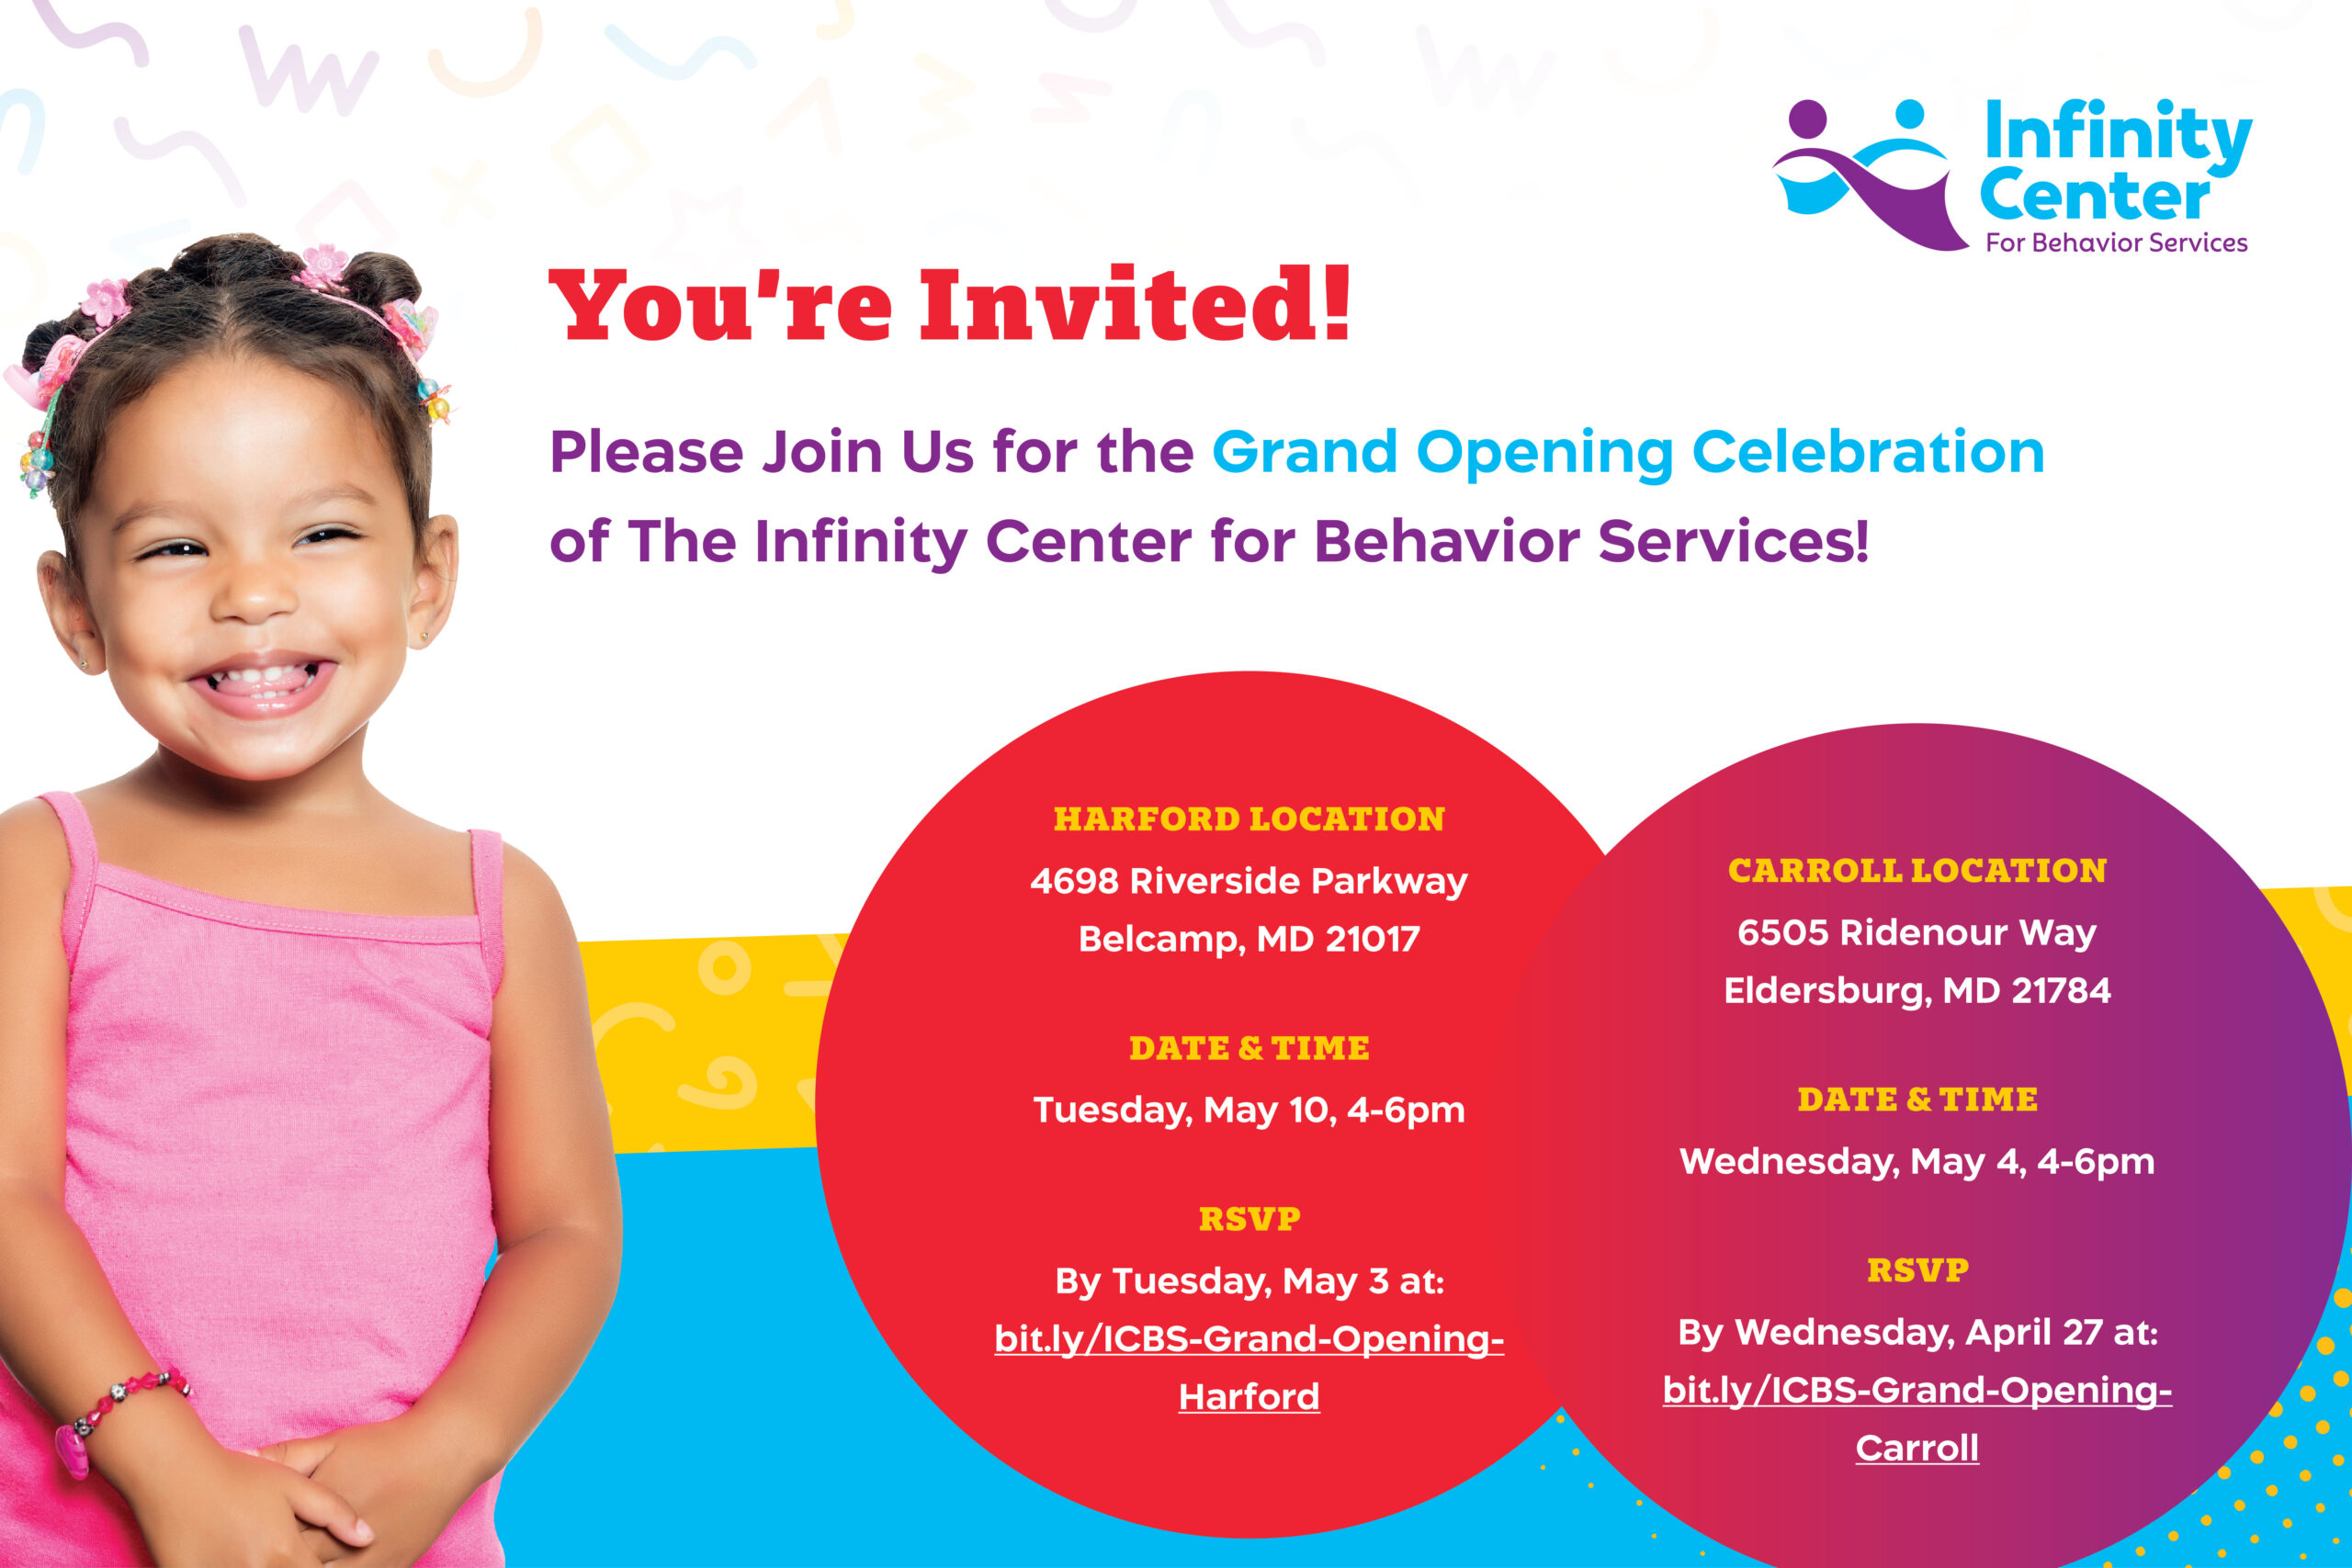 Join us for the Grand Opening of the Infinity Center for Behavior Services!